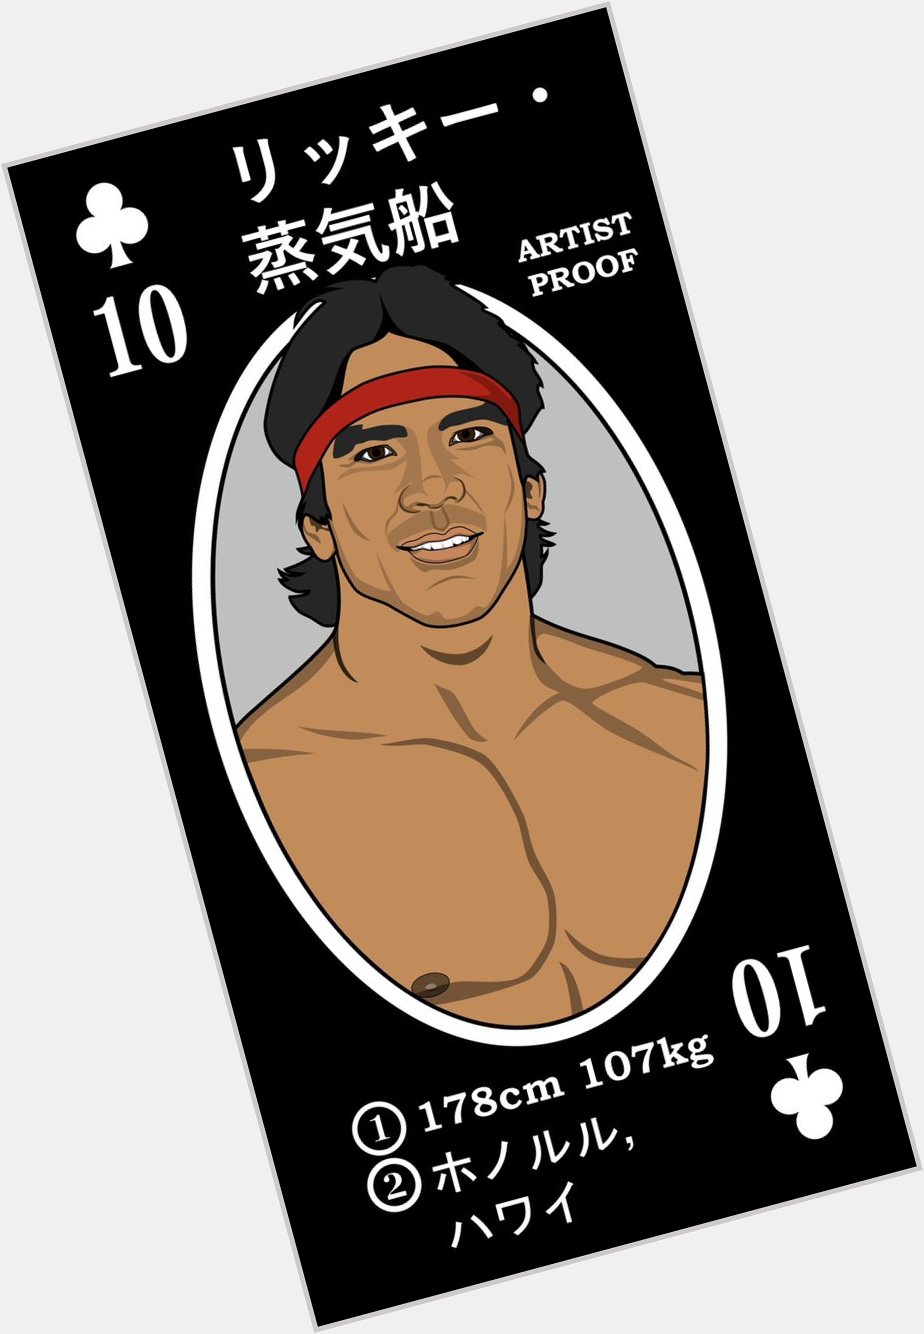 Happy 70th Birthday to the Dragon, Ricky Steamboat! He was one of my favorites growing up. 